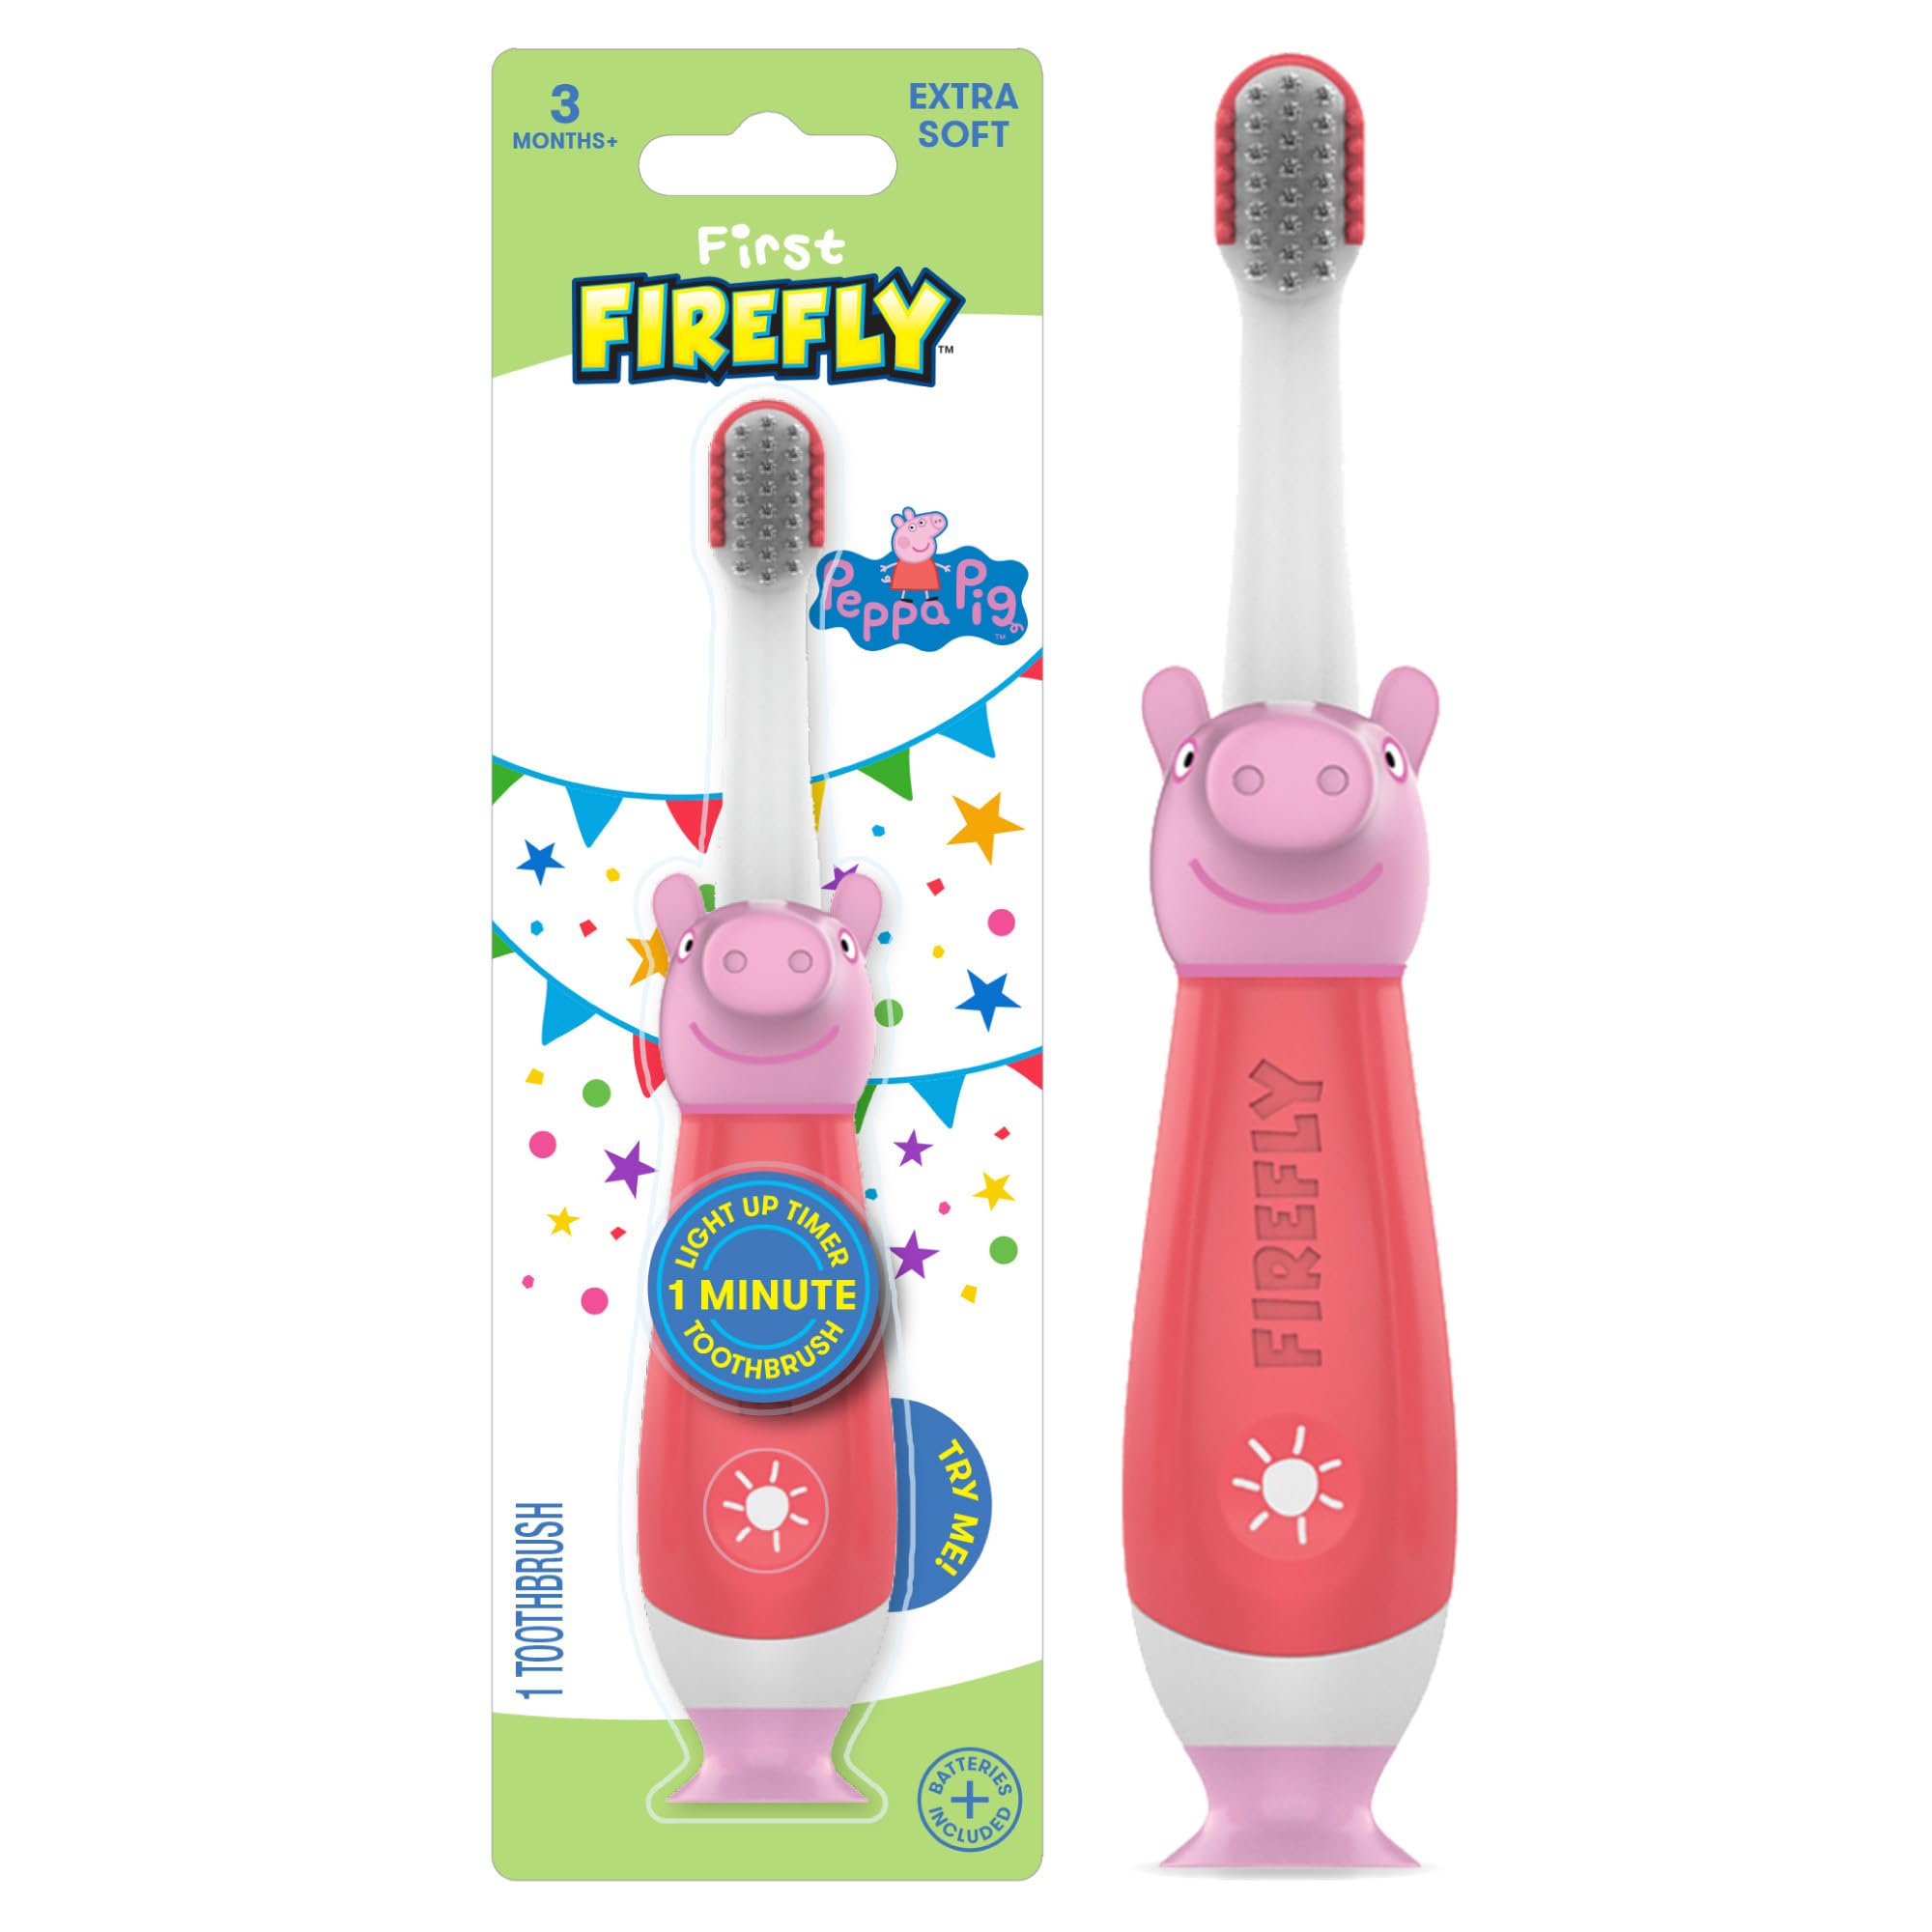 Firefly First Peppa Pig Light Up Timer Toothbrush with Extra Soft Bristles, 1 Count